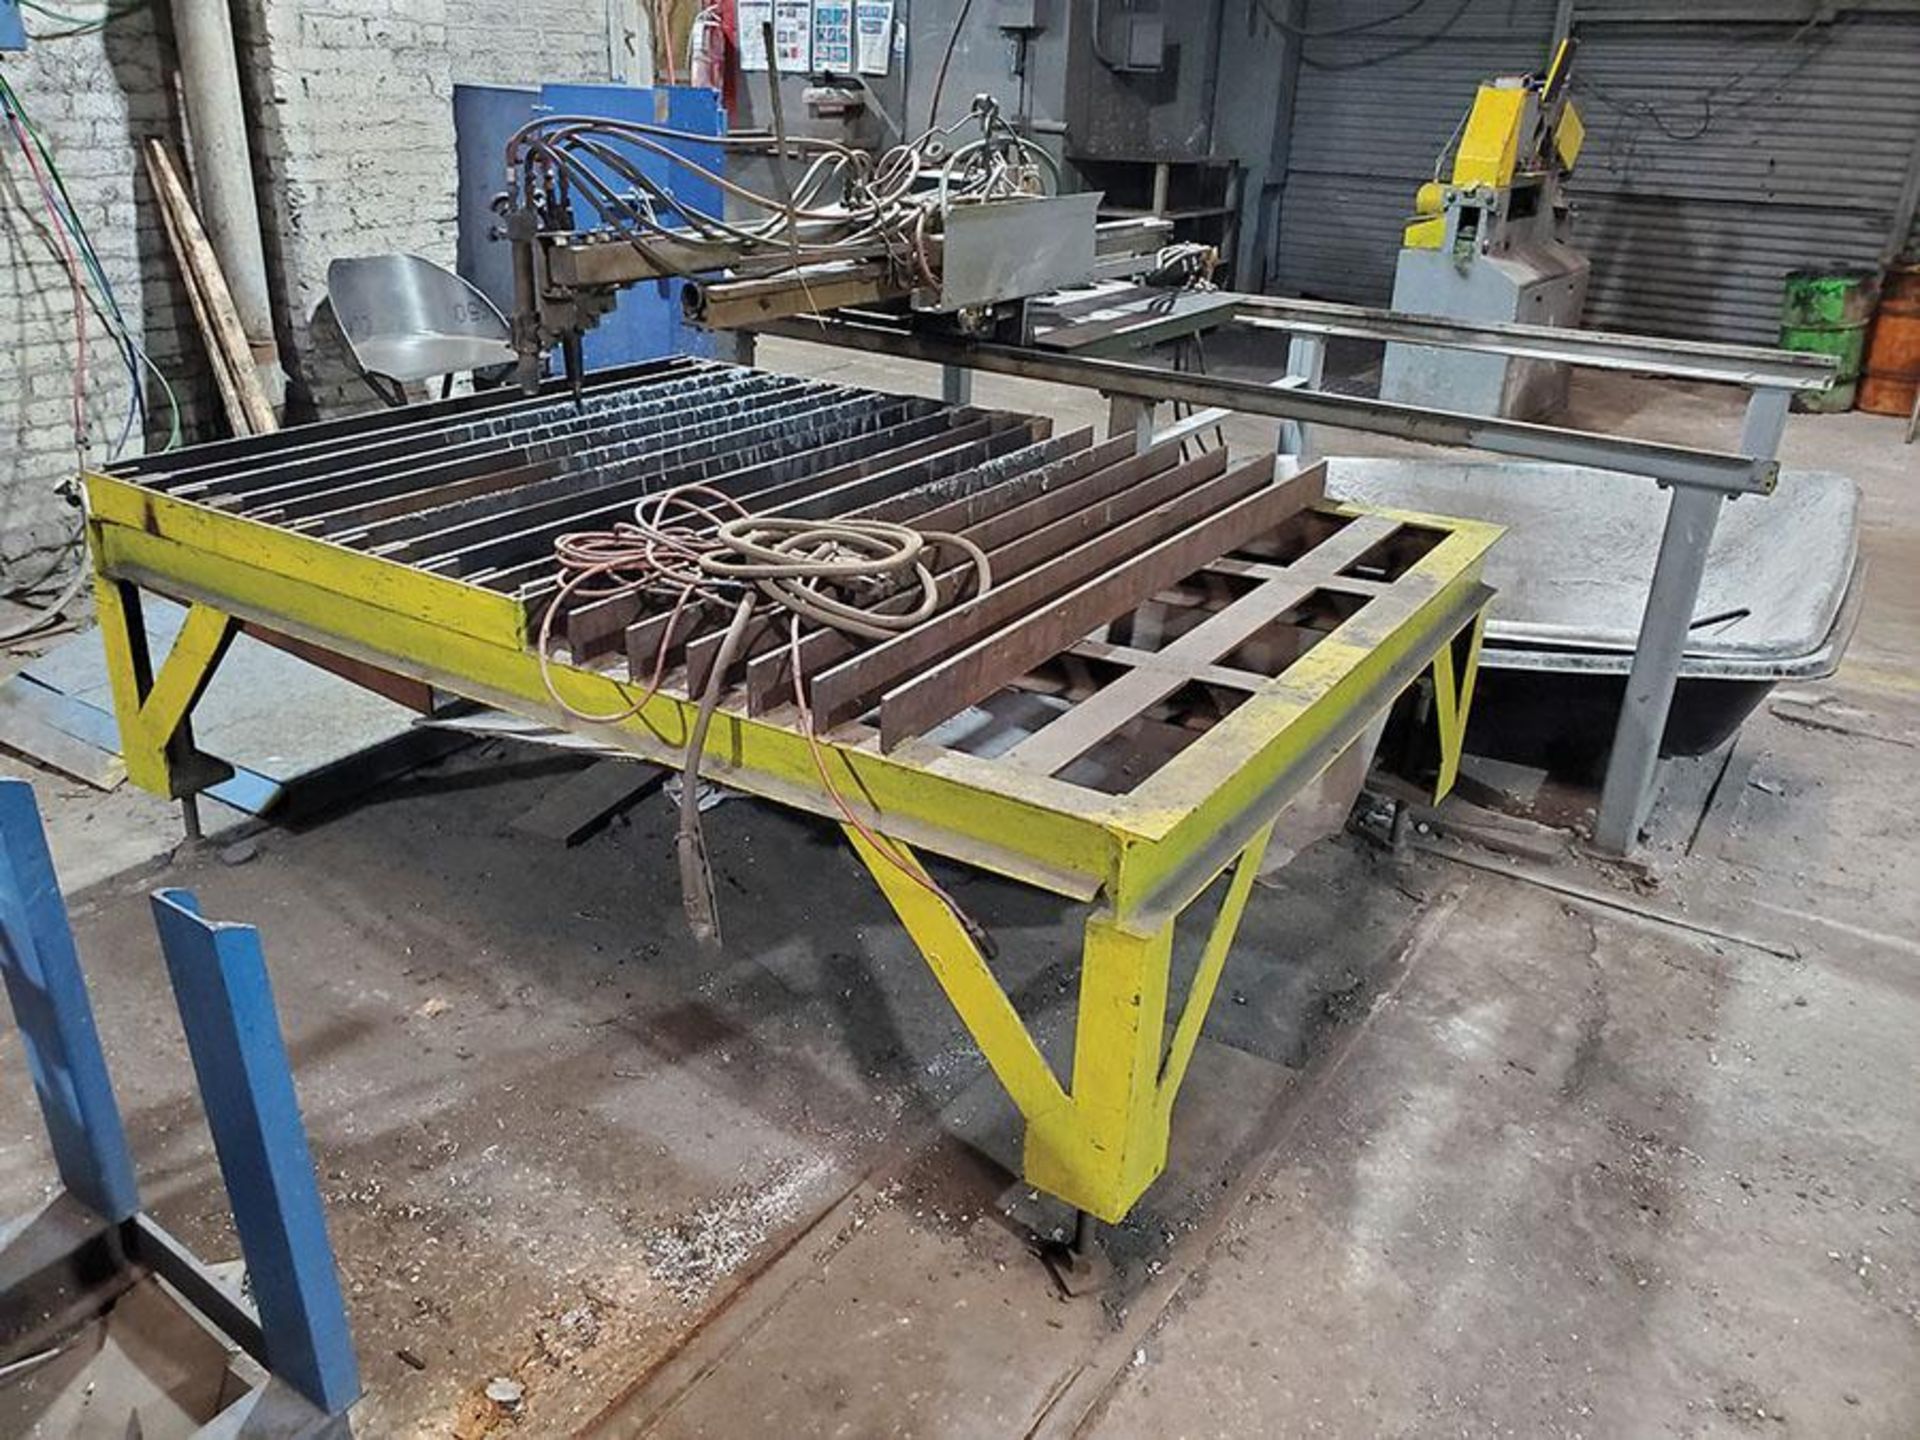 oxy acetylene cutting table, 82" x 60", Wesco tracer torch trolley, dual torch head - Image 2 of 8